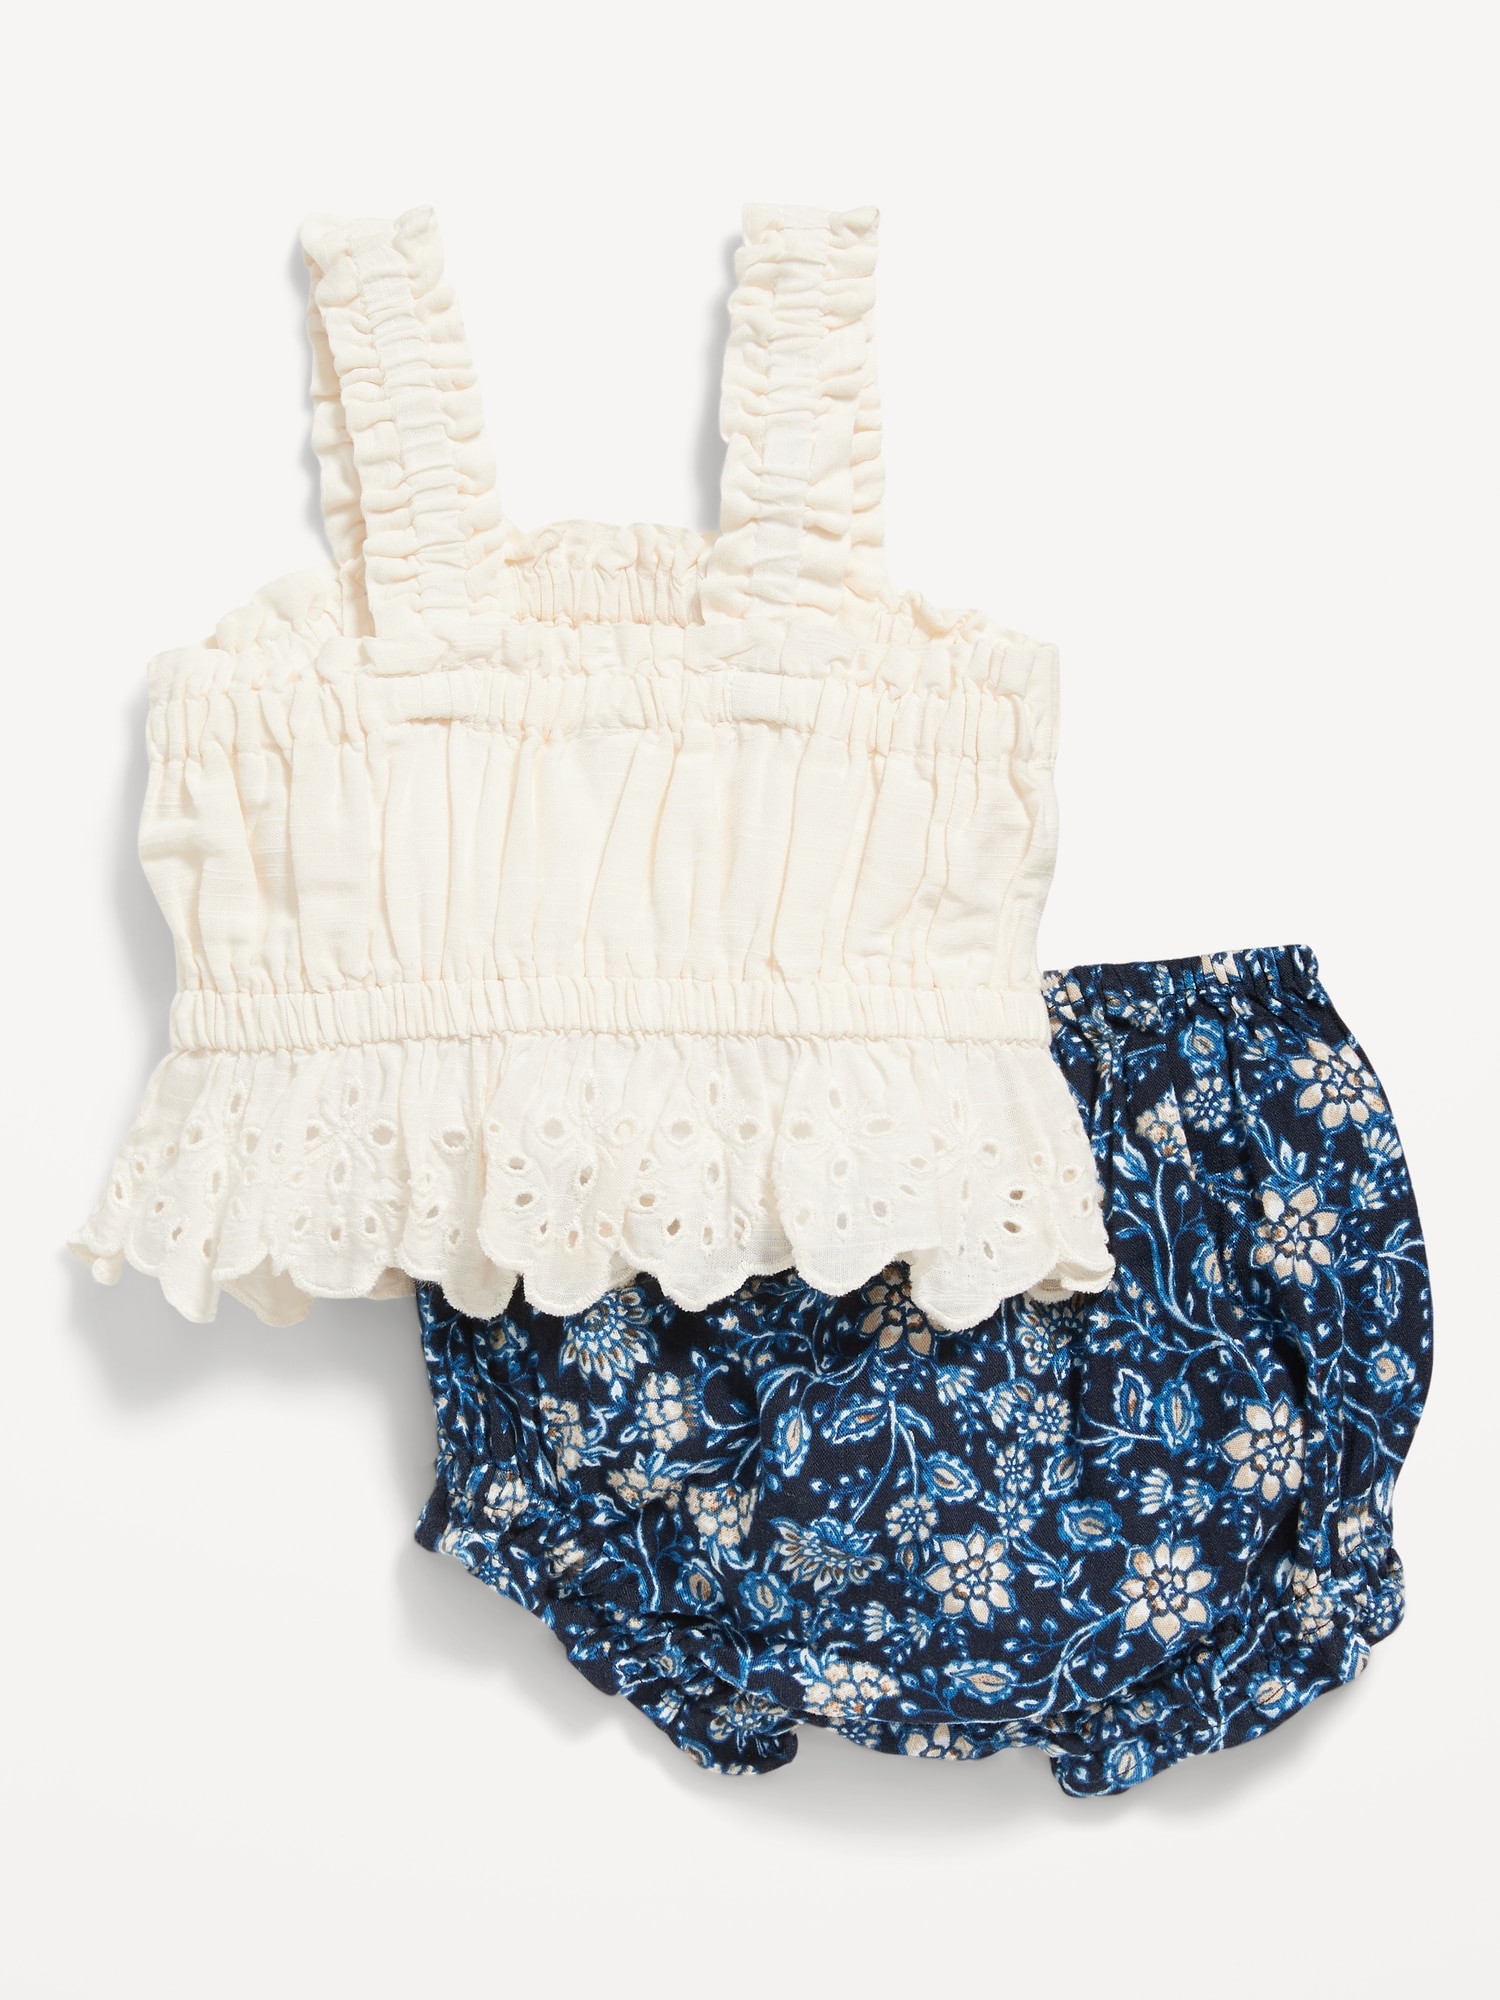 Summer Old Navy Matching Sets For Teenage Boys And Girls Short Sleeve Strip  Top And Skirt Pants Suit From Mobeisiran, $37.12